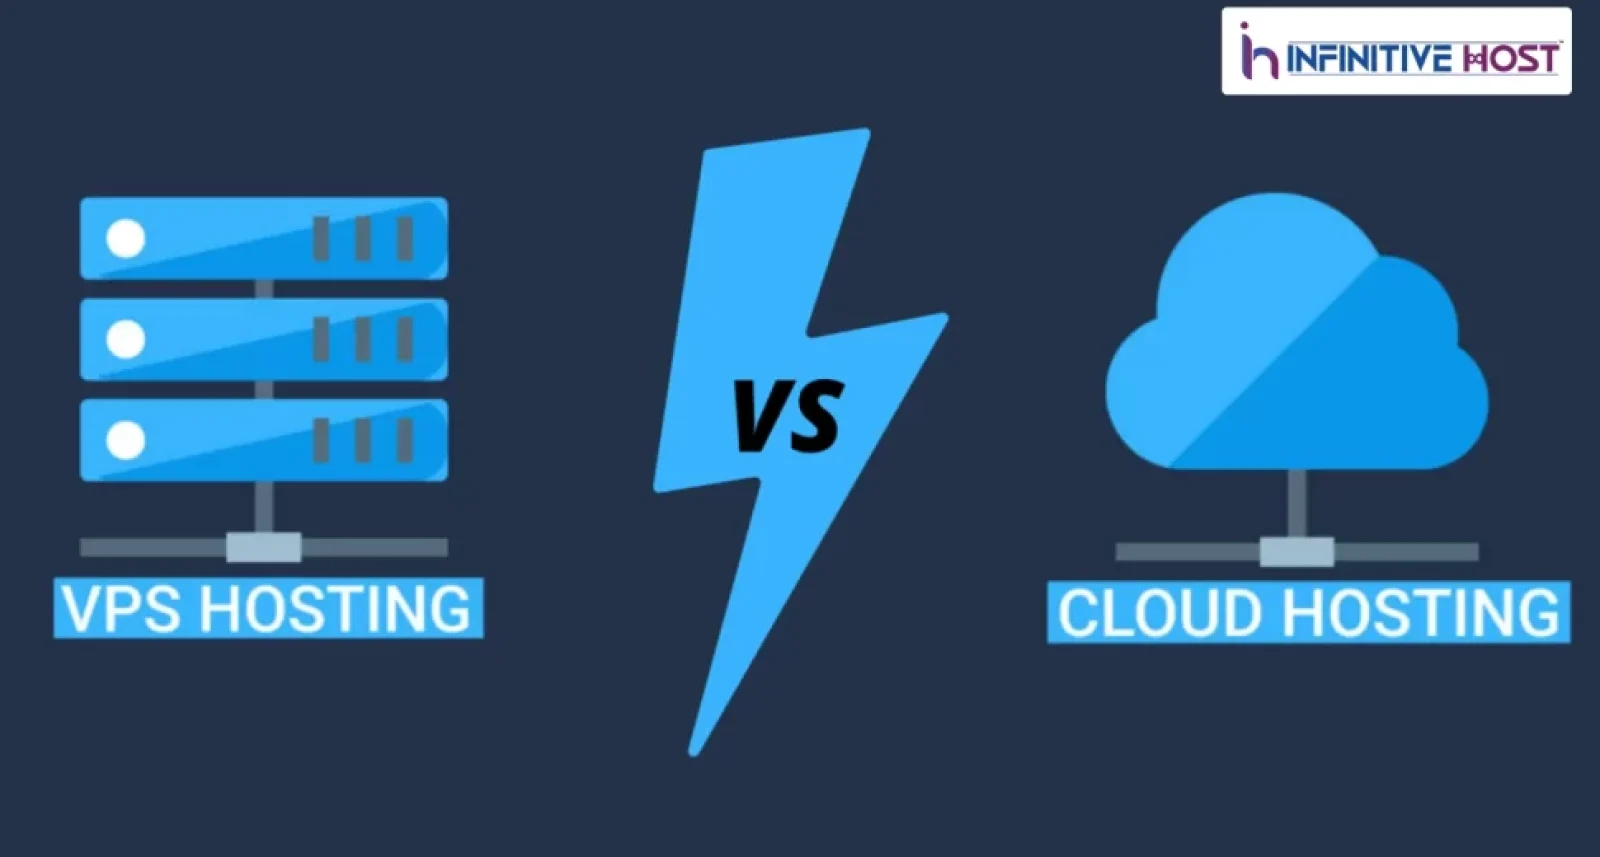 VPS Hosting Vs Cloud Hosting: What Is The Difference?